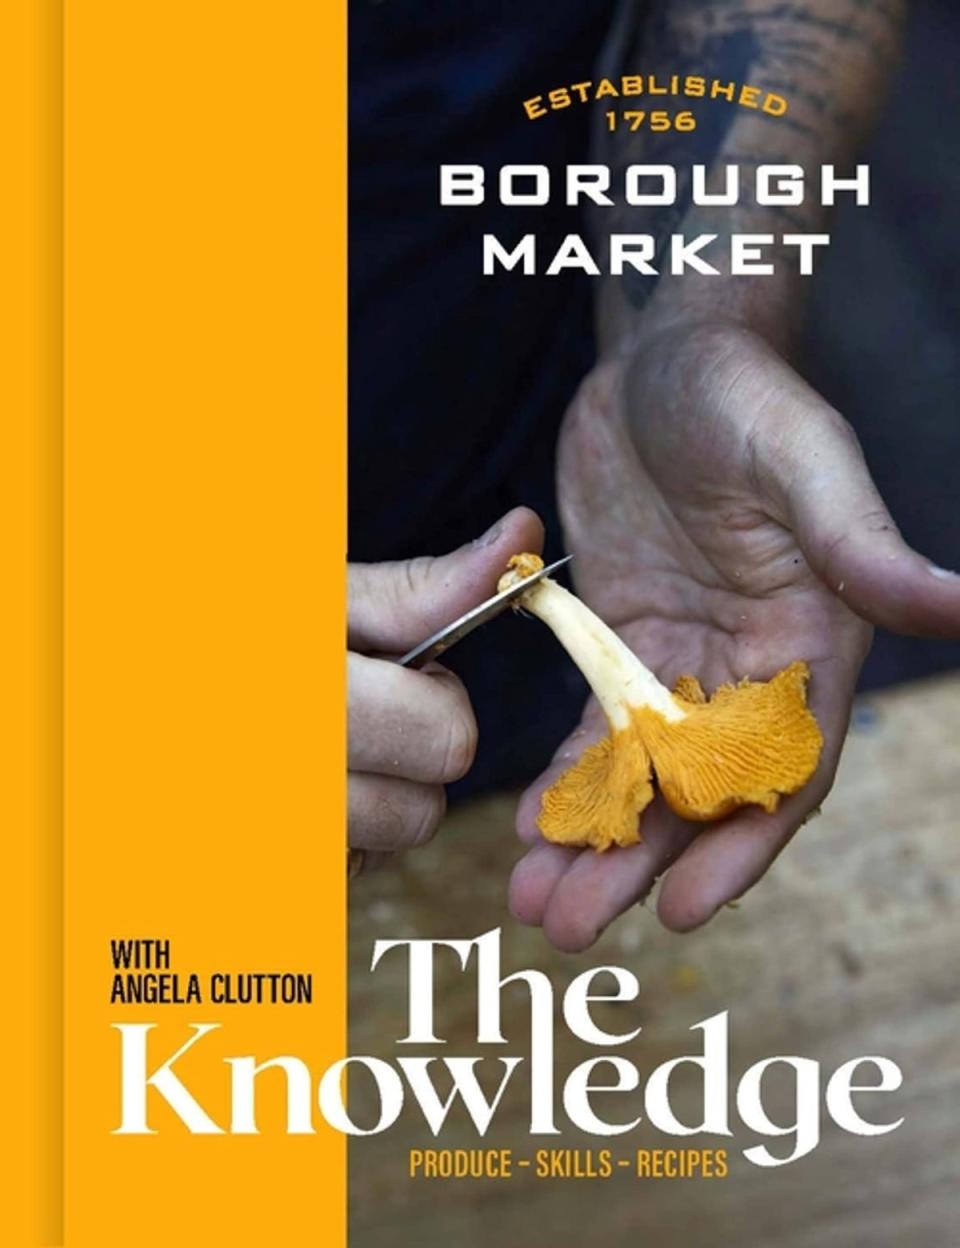 The Market’s new book is available in October (Hodder & Stoughton)